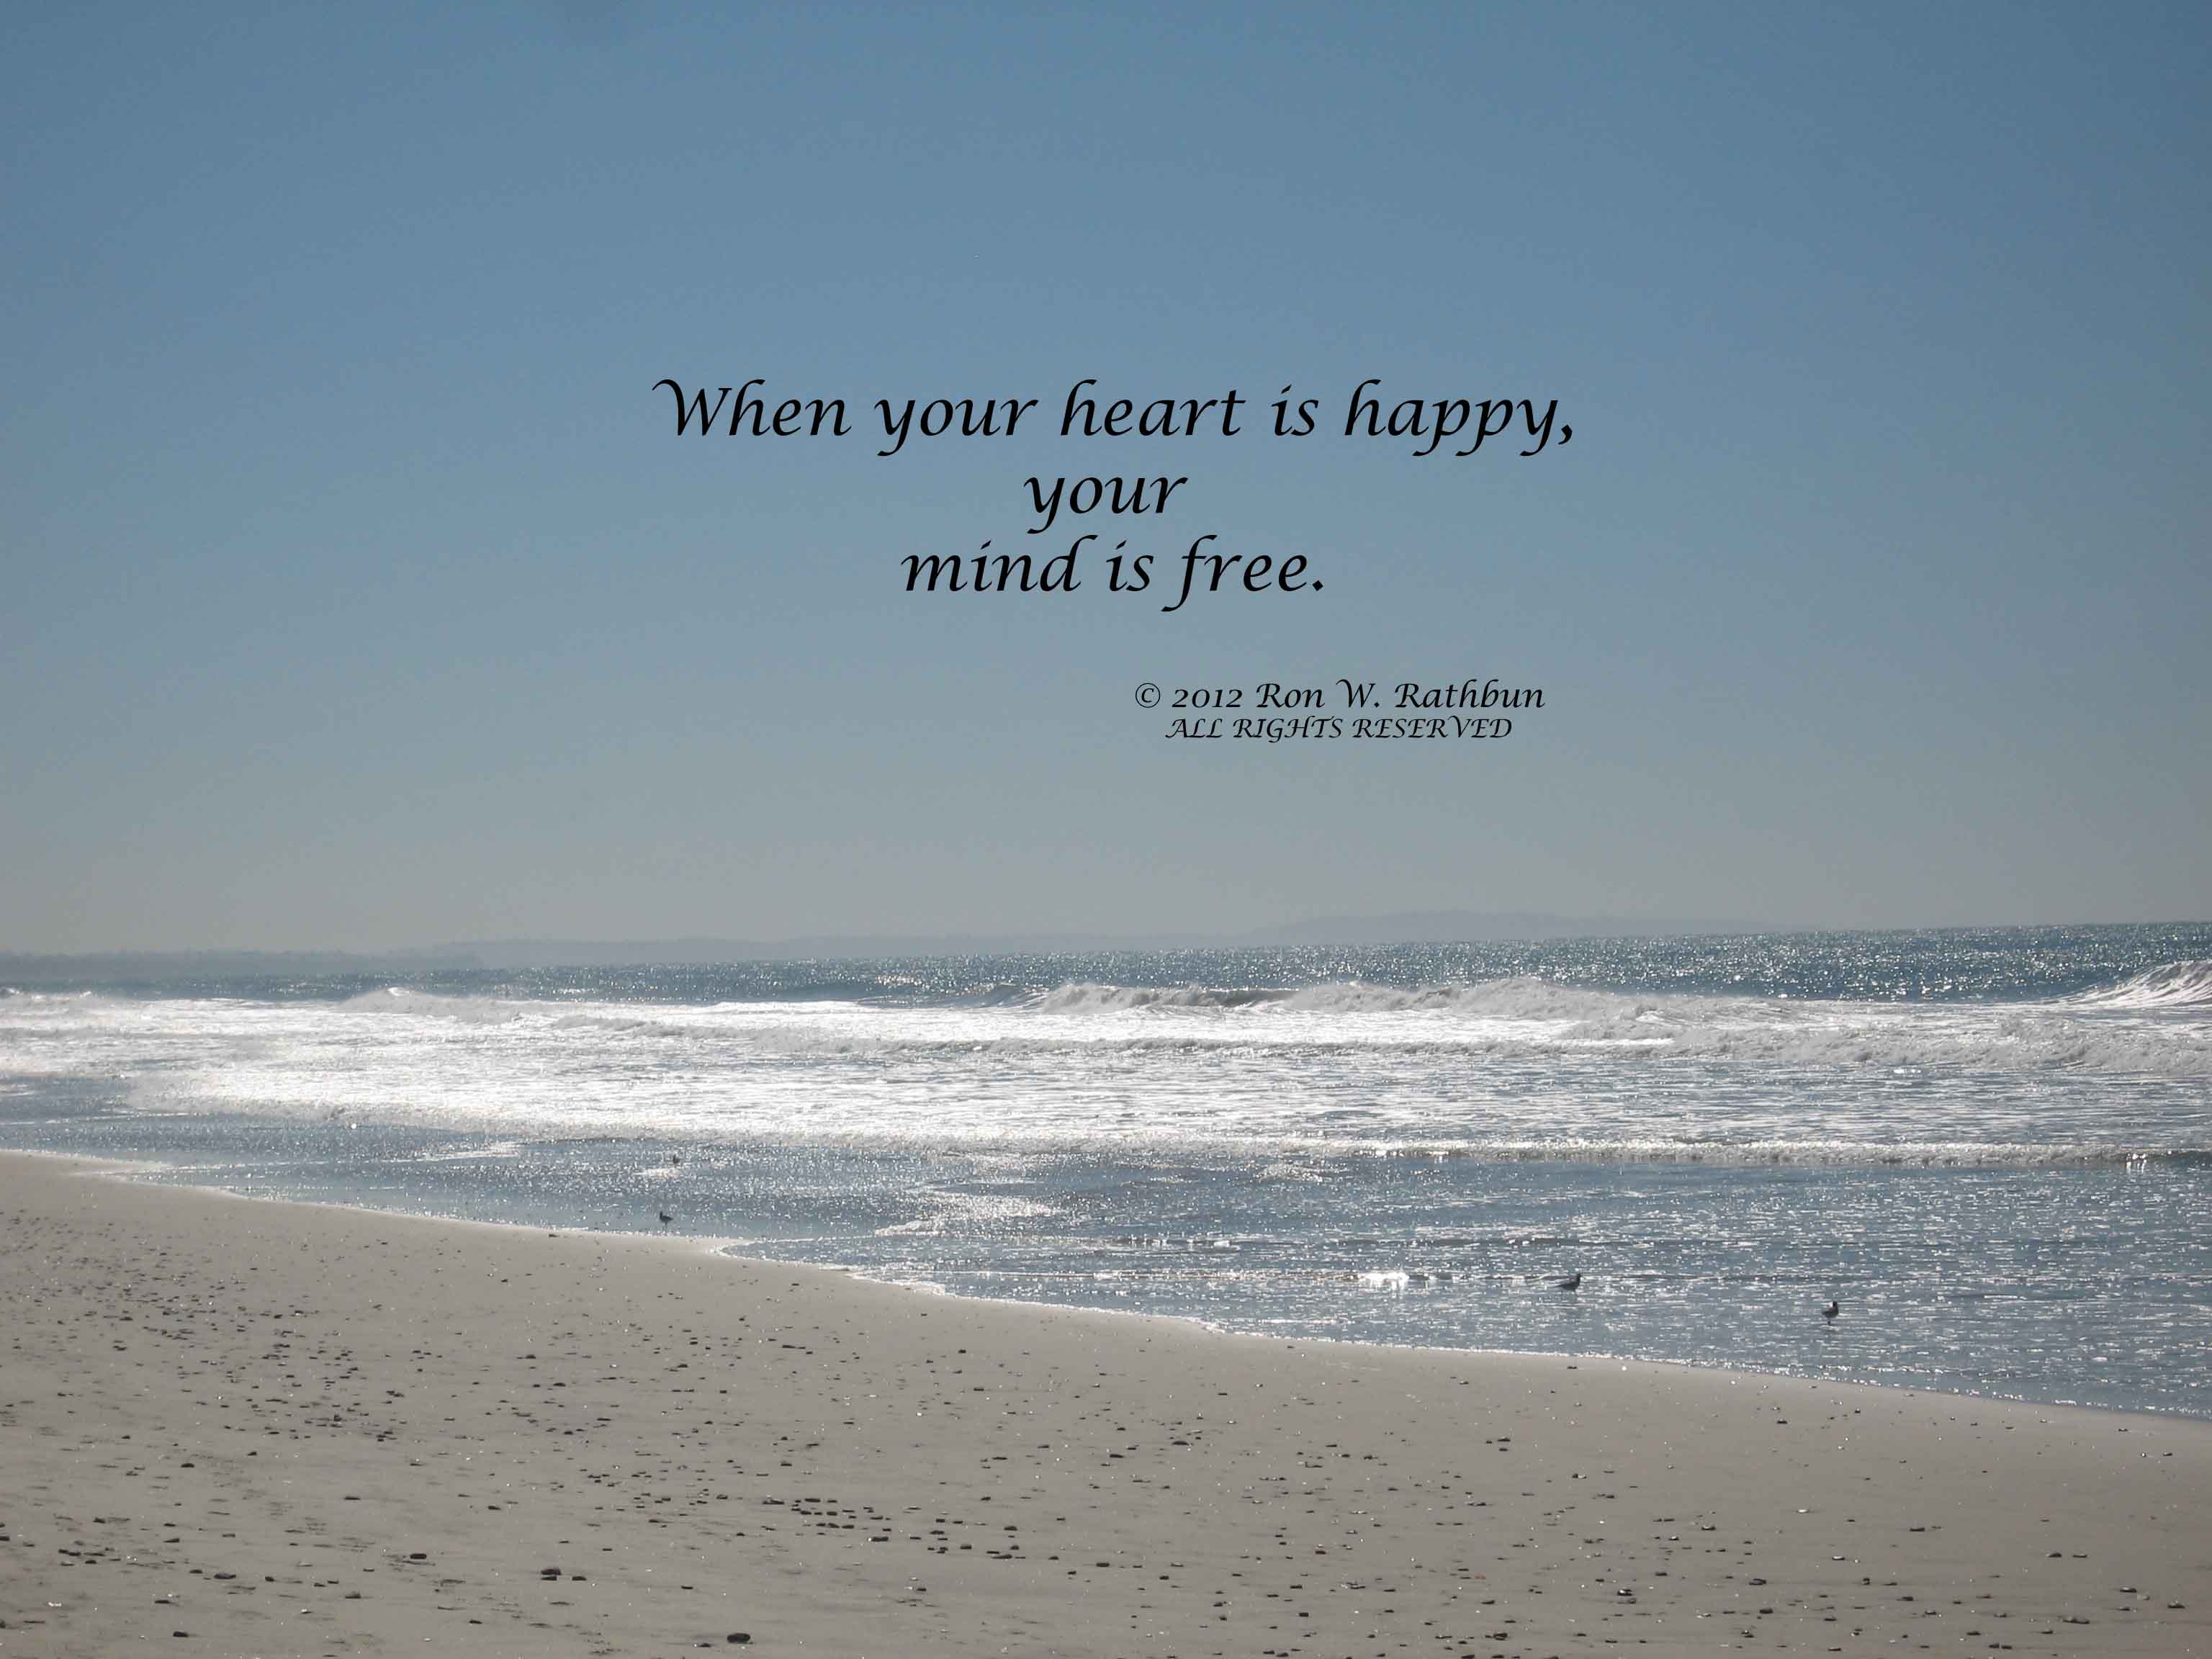 Quotes About Finding Inner Happiness. QuotesGram